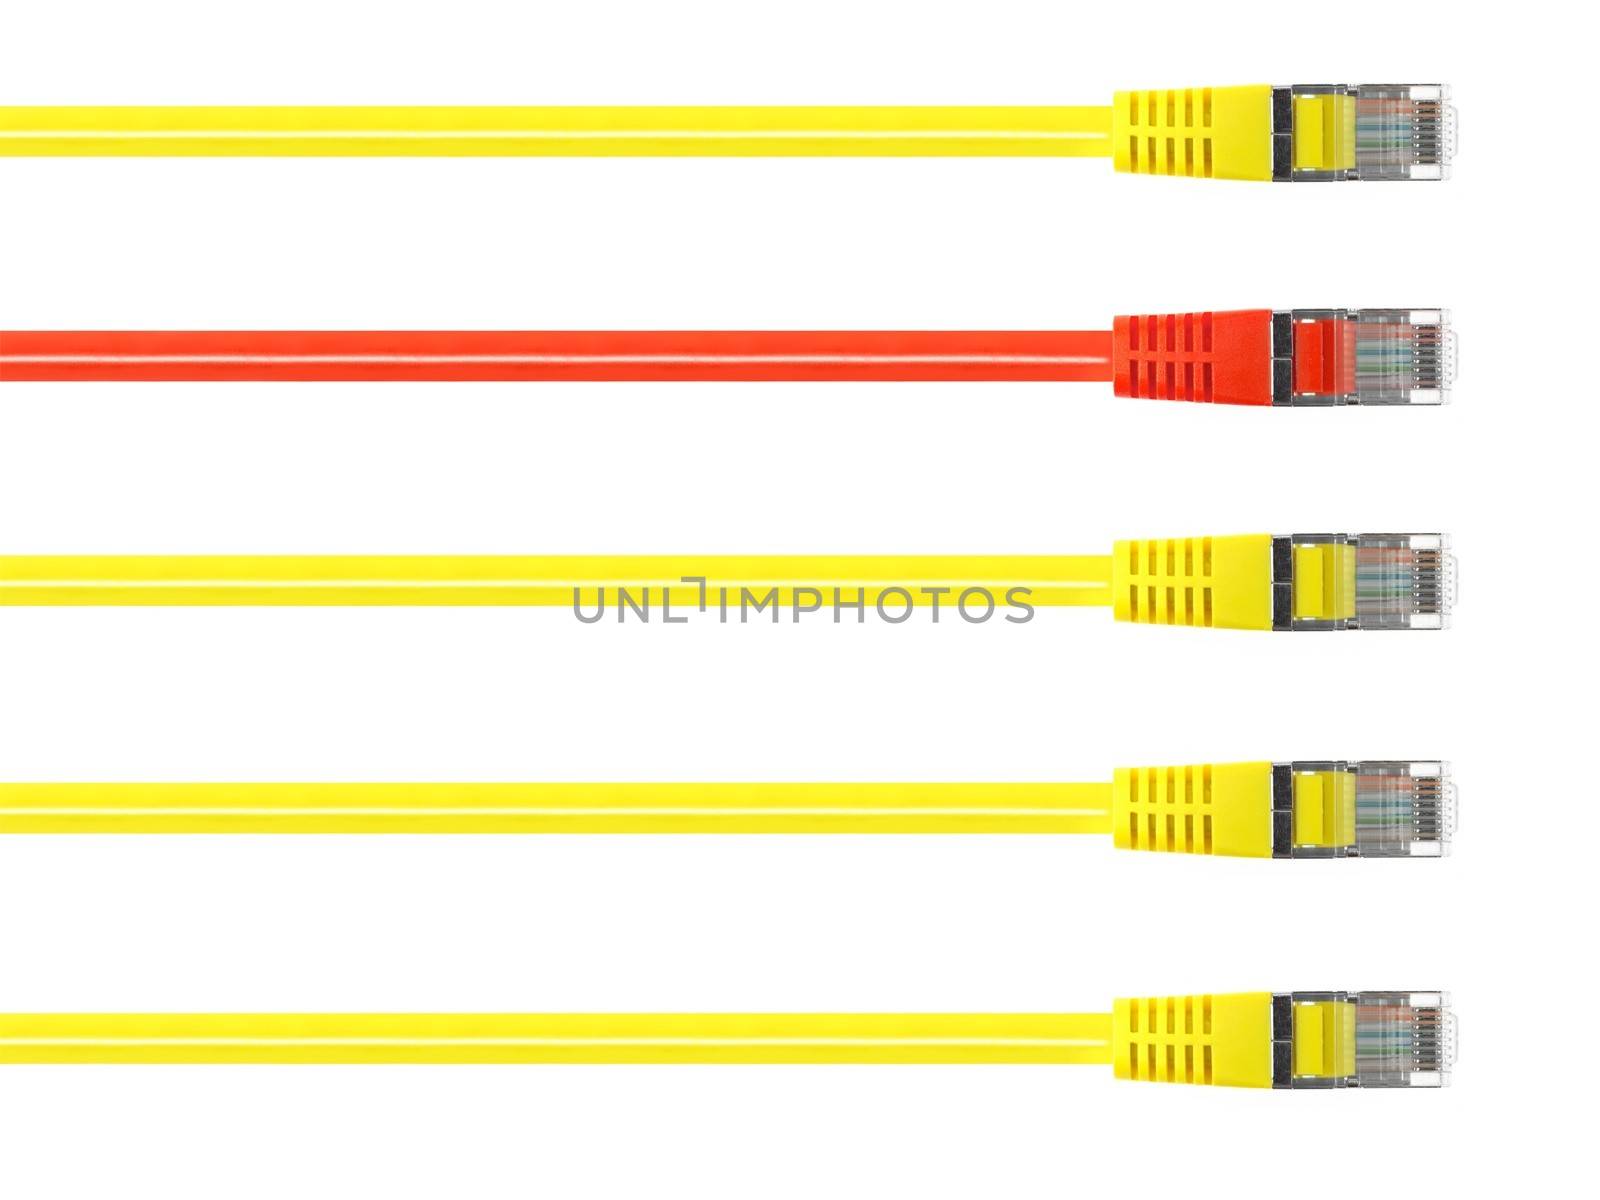 Ethernet cables isolated against a plain background